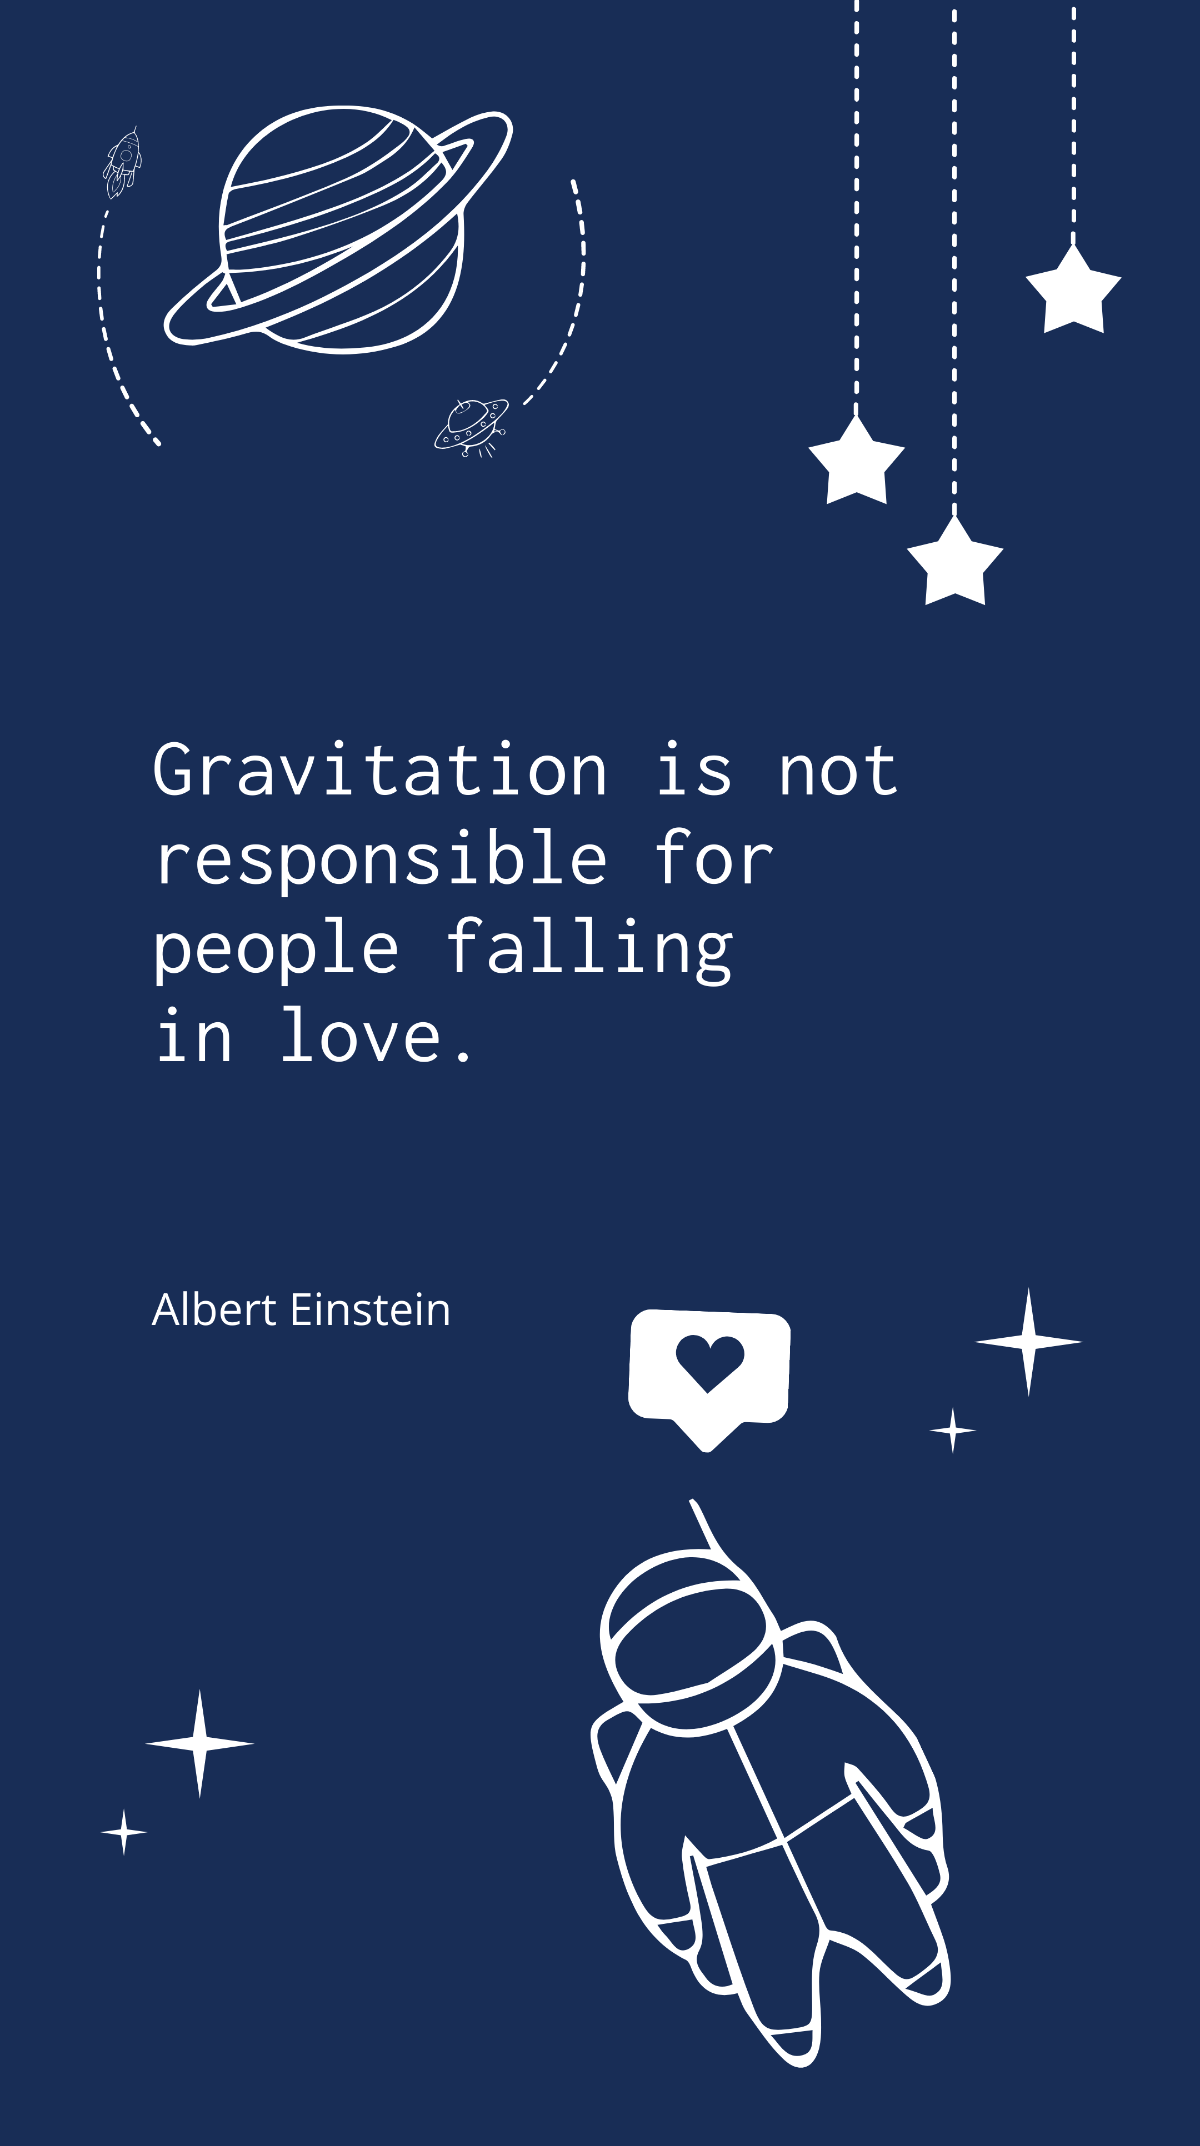 Albert Einstein - “Gravitation is not responsible for people falling in love.” Template